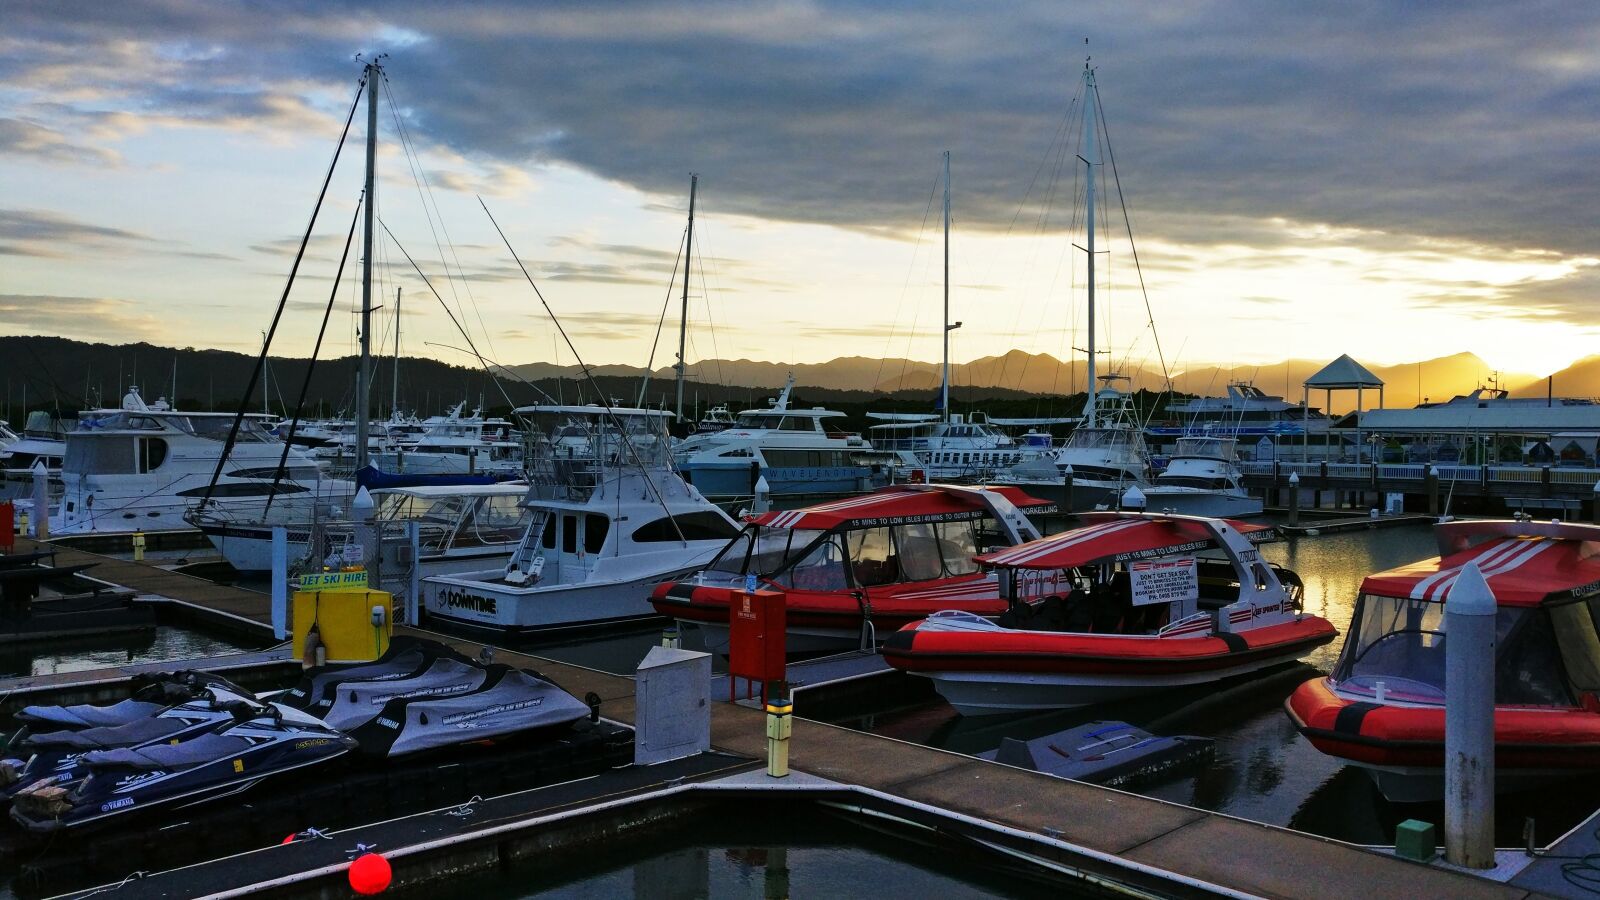 OnePlus A3000 sample photo. Port douglas, boat, harbour photography